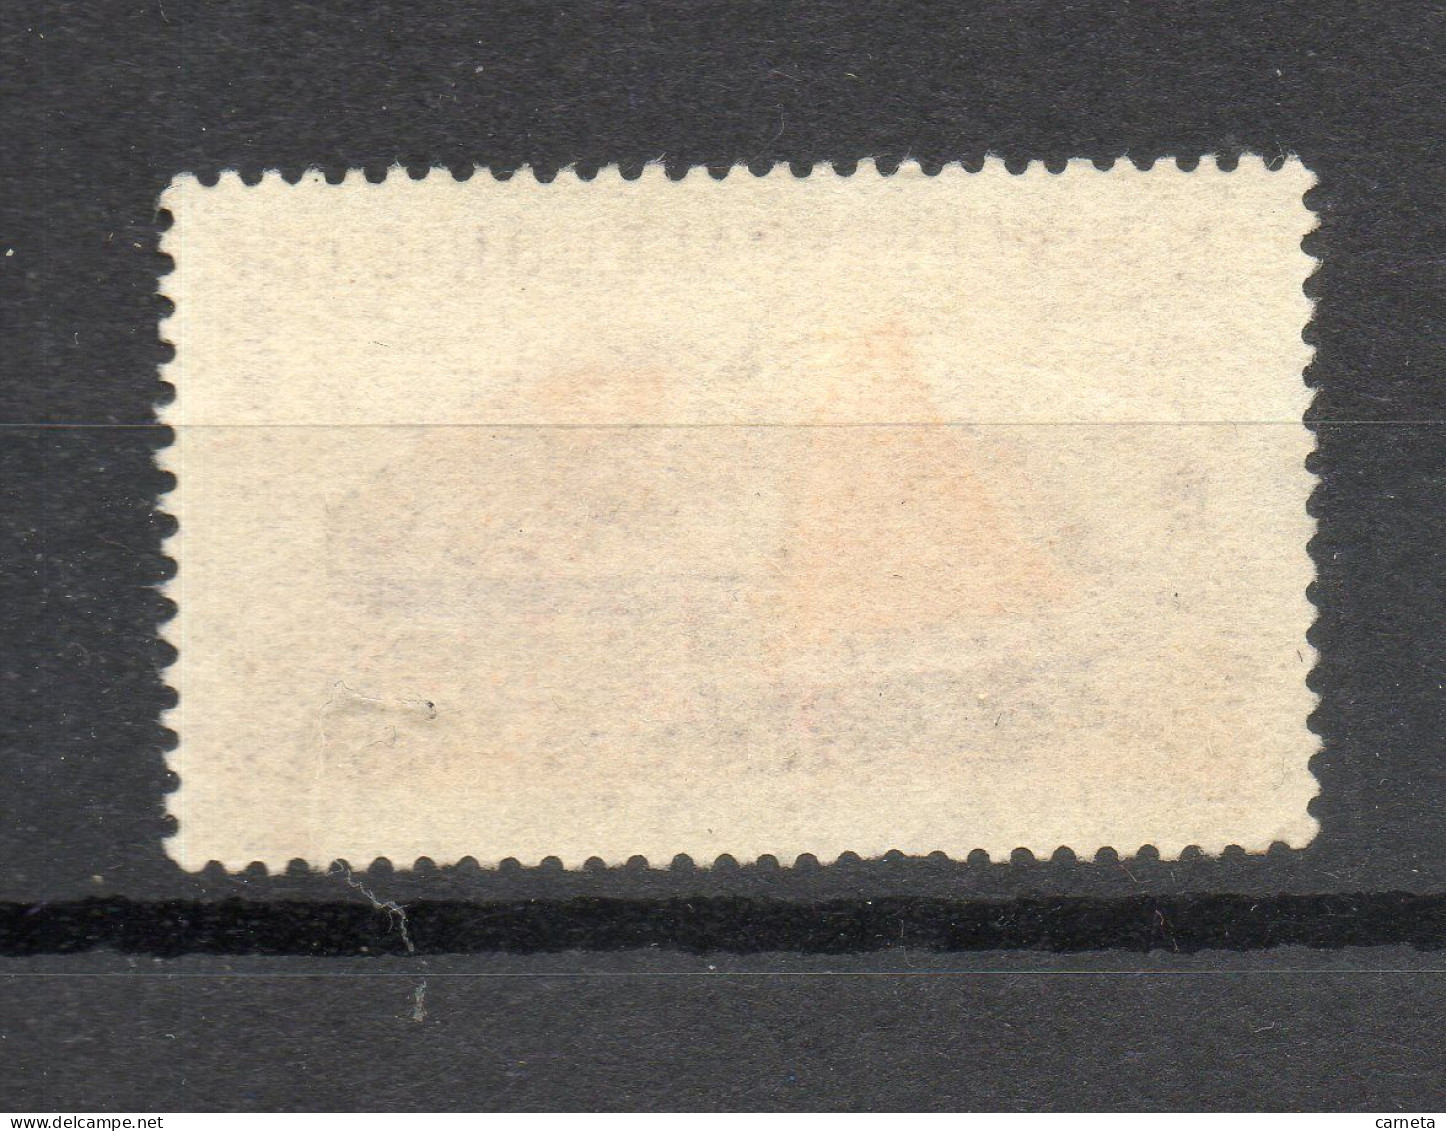 Nlle CALEDONIE N° 265   OBLITERE COTE 0.75€   PAYSAGE  BATEAUX - Used Stamps